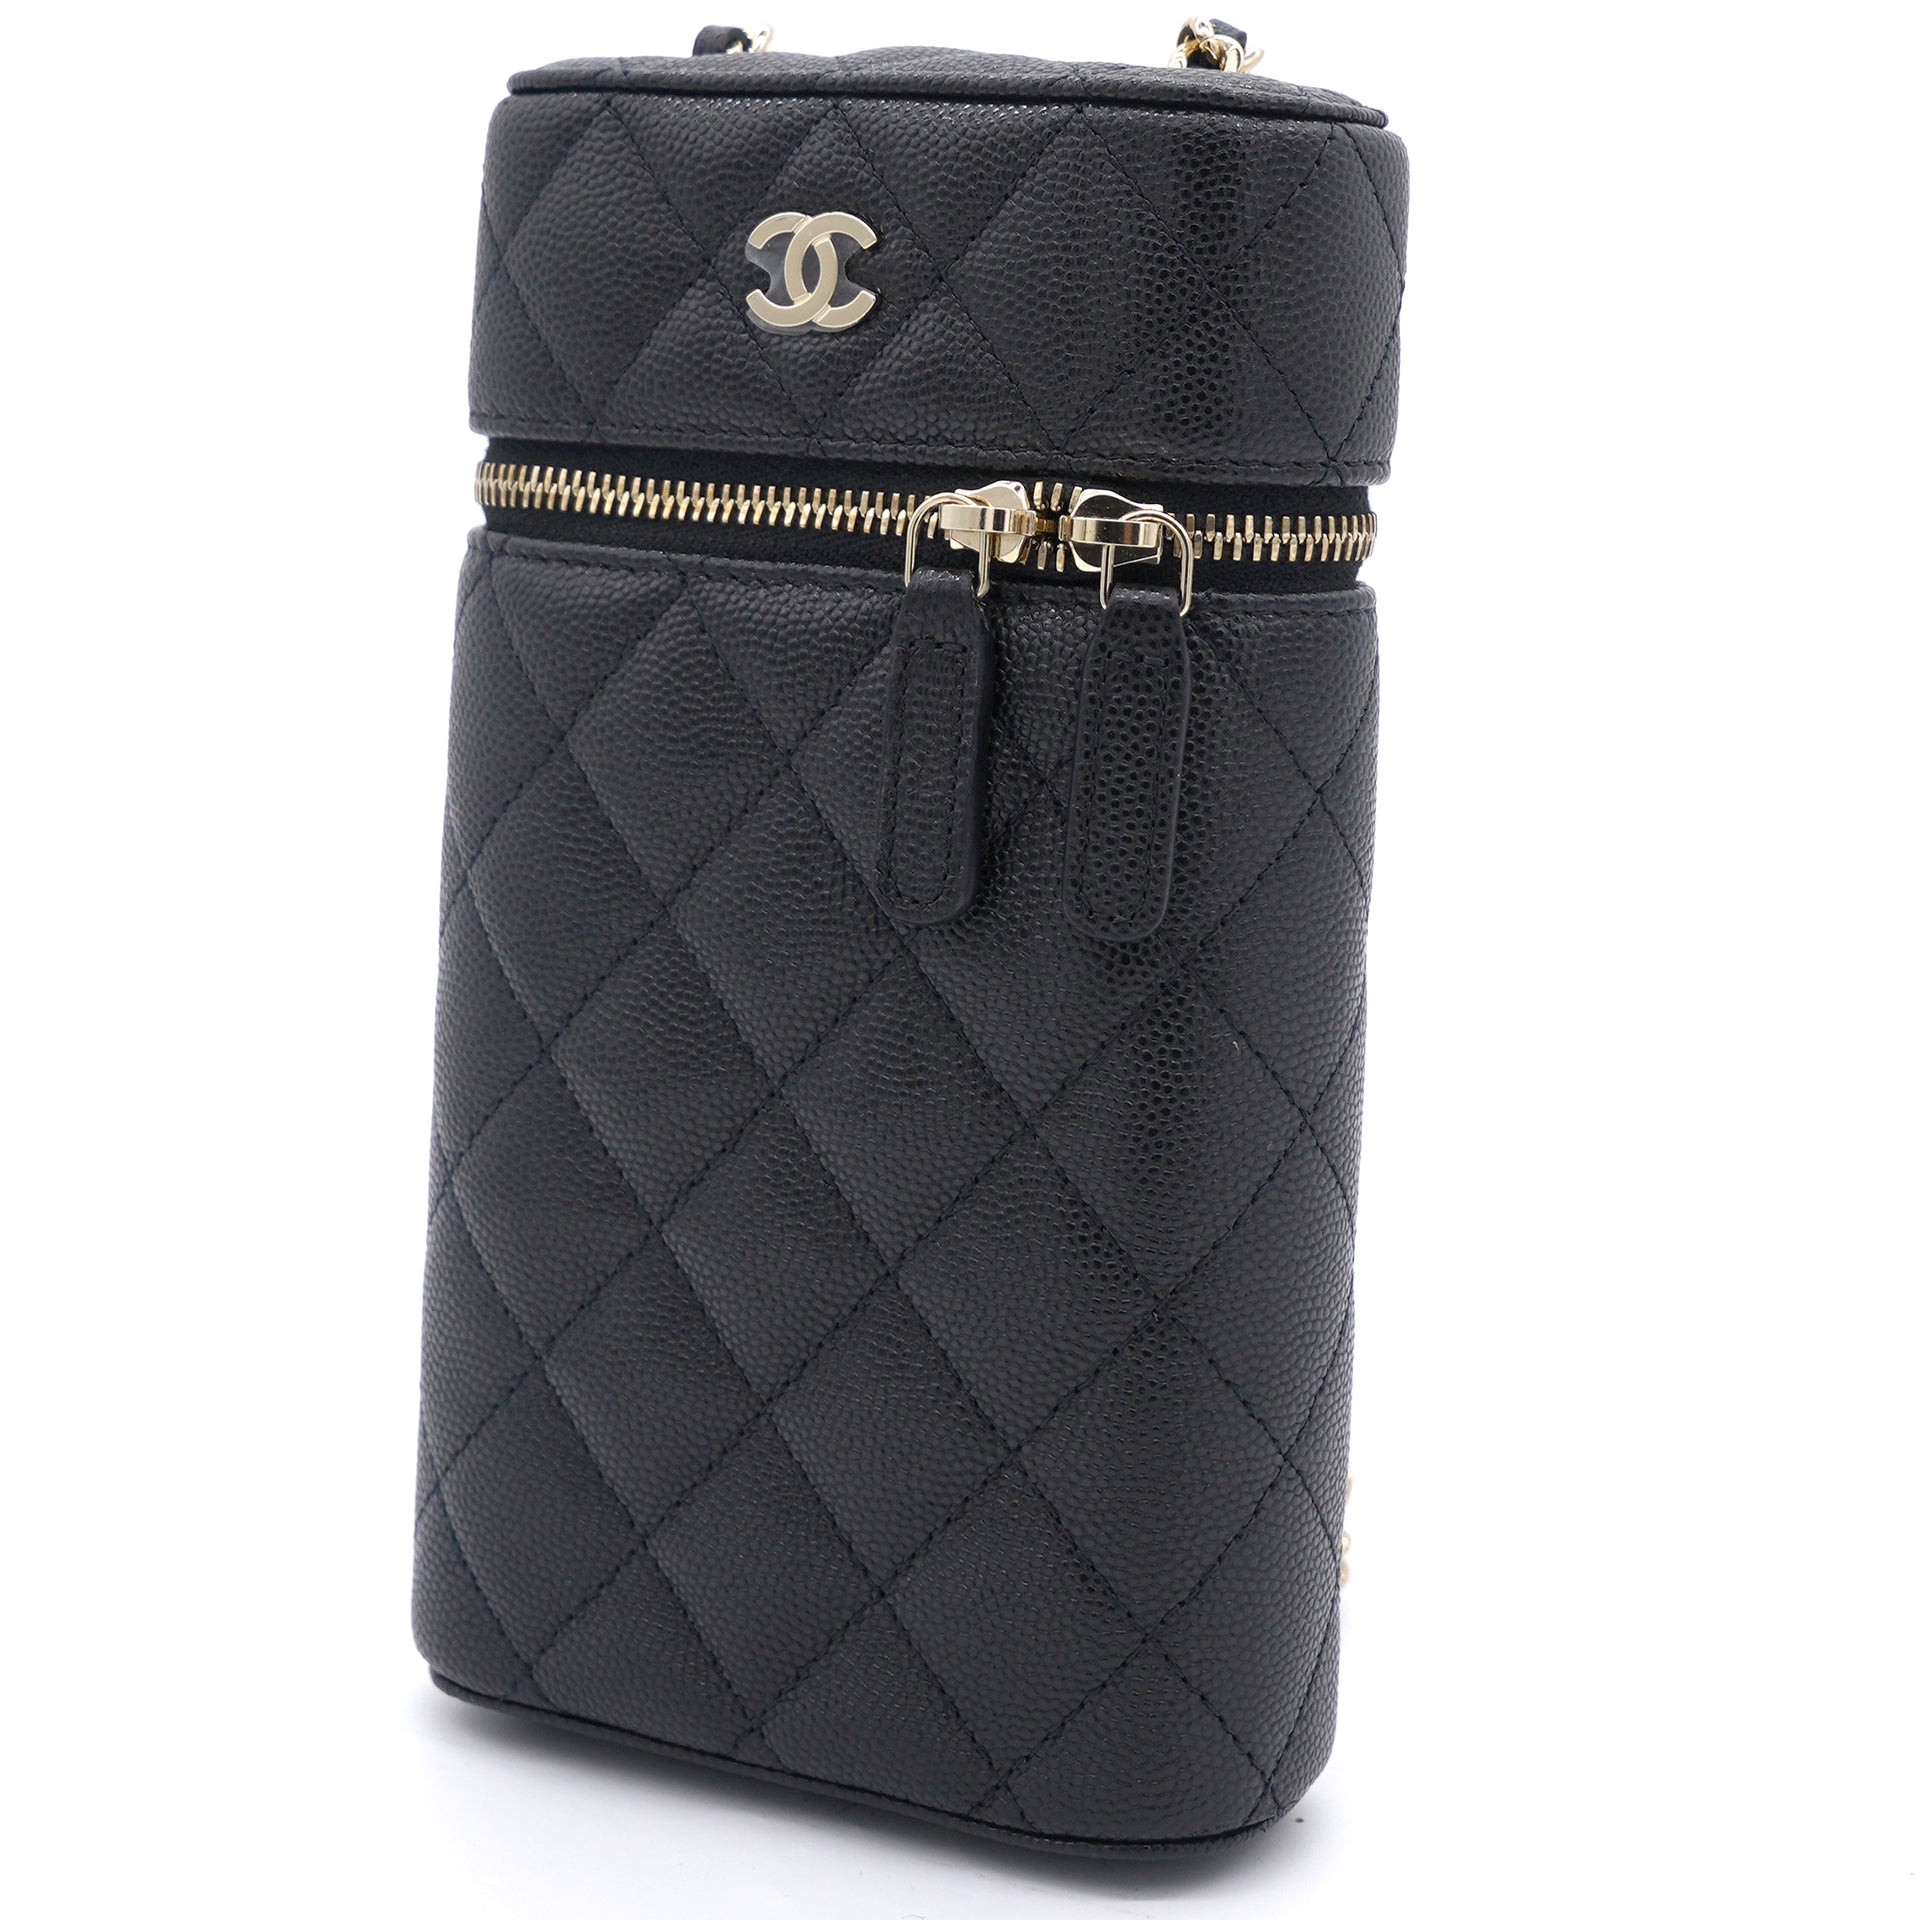 Caviar Quilted Small Vertical Vanity Case With Chain Black